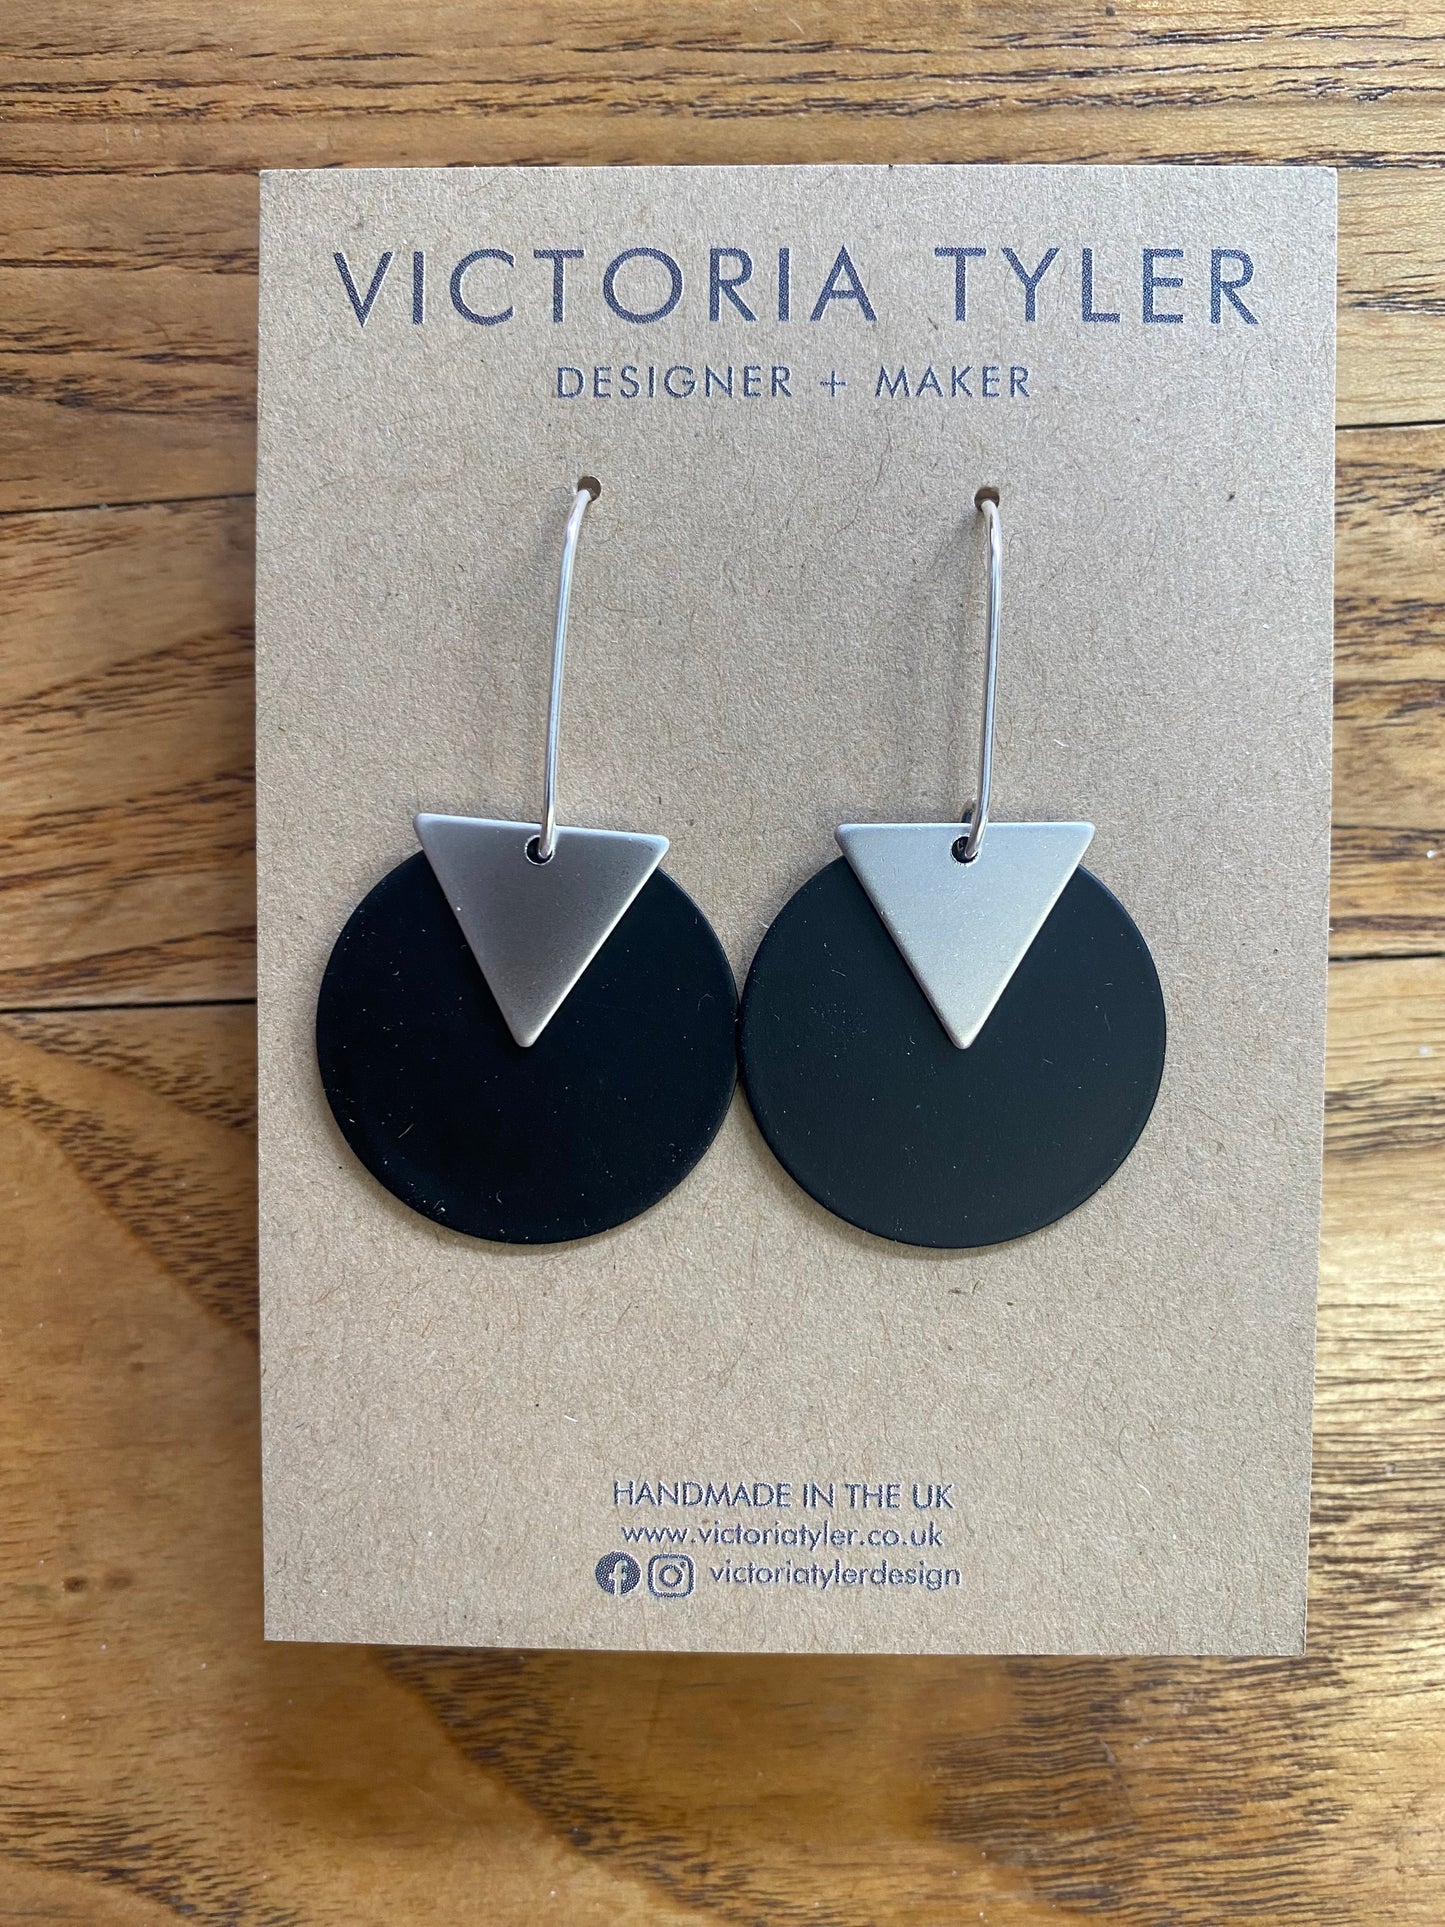 Black Circle Dangly Earrings with Silver Plate Triangles - 'Kiki'. On a black backing card which says 'Victoria Tyler, Designer + Maker